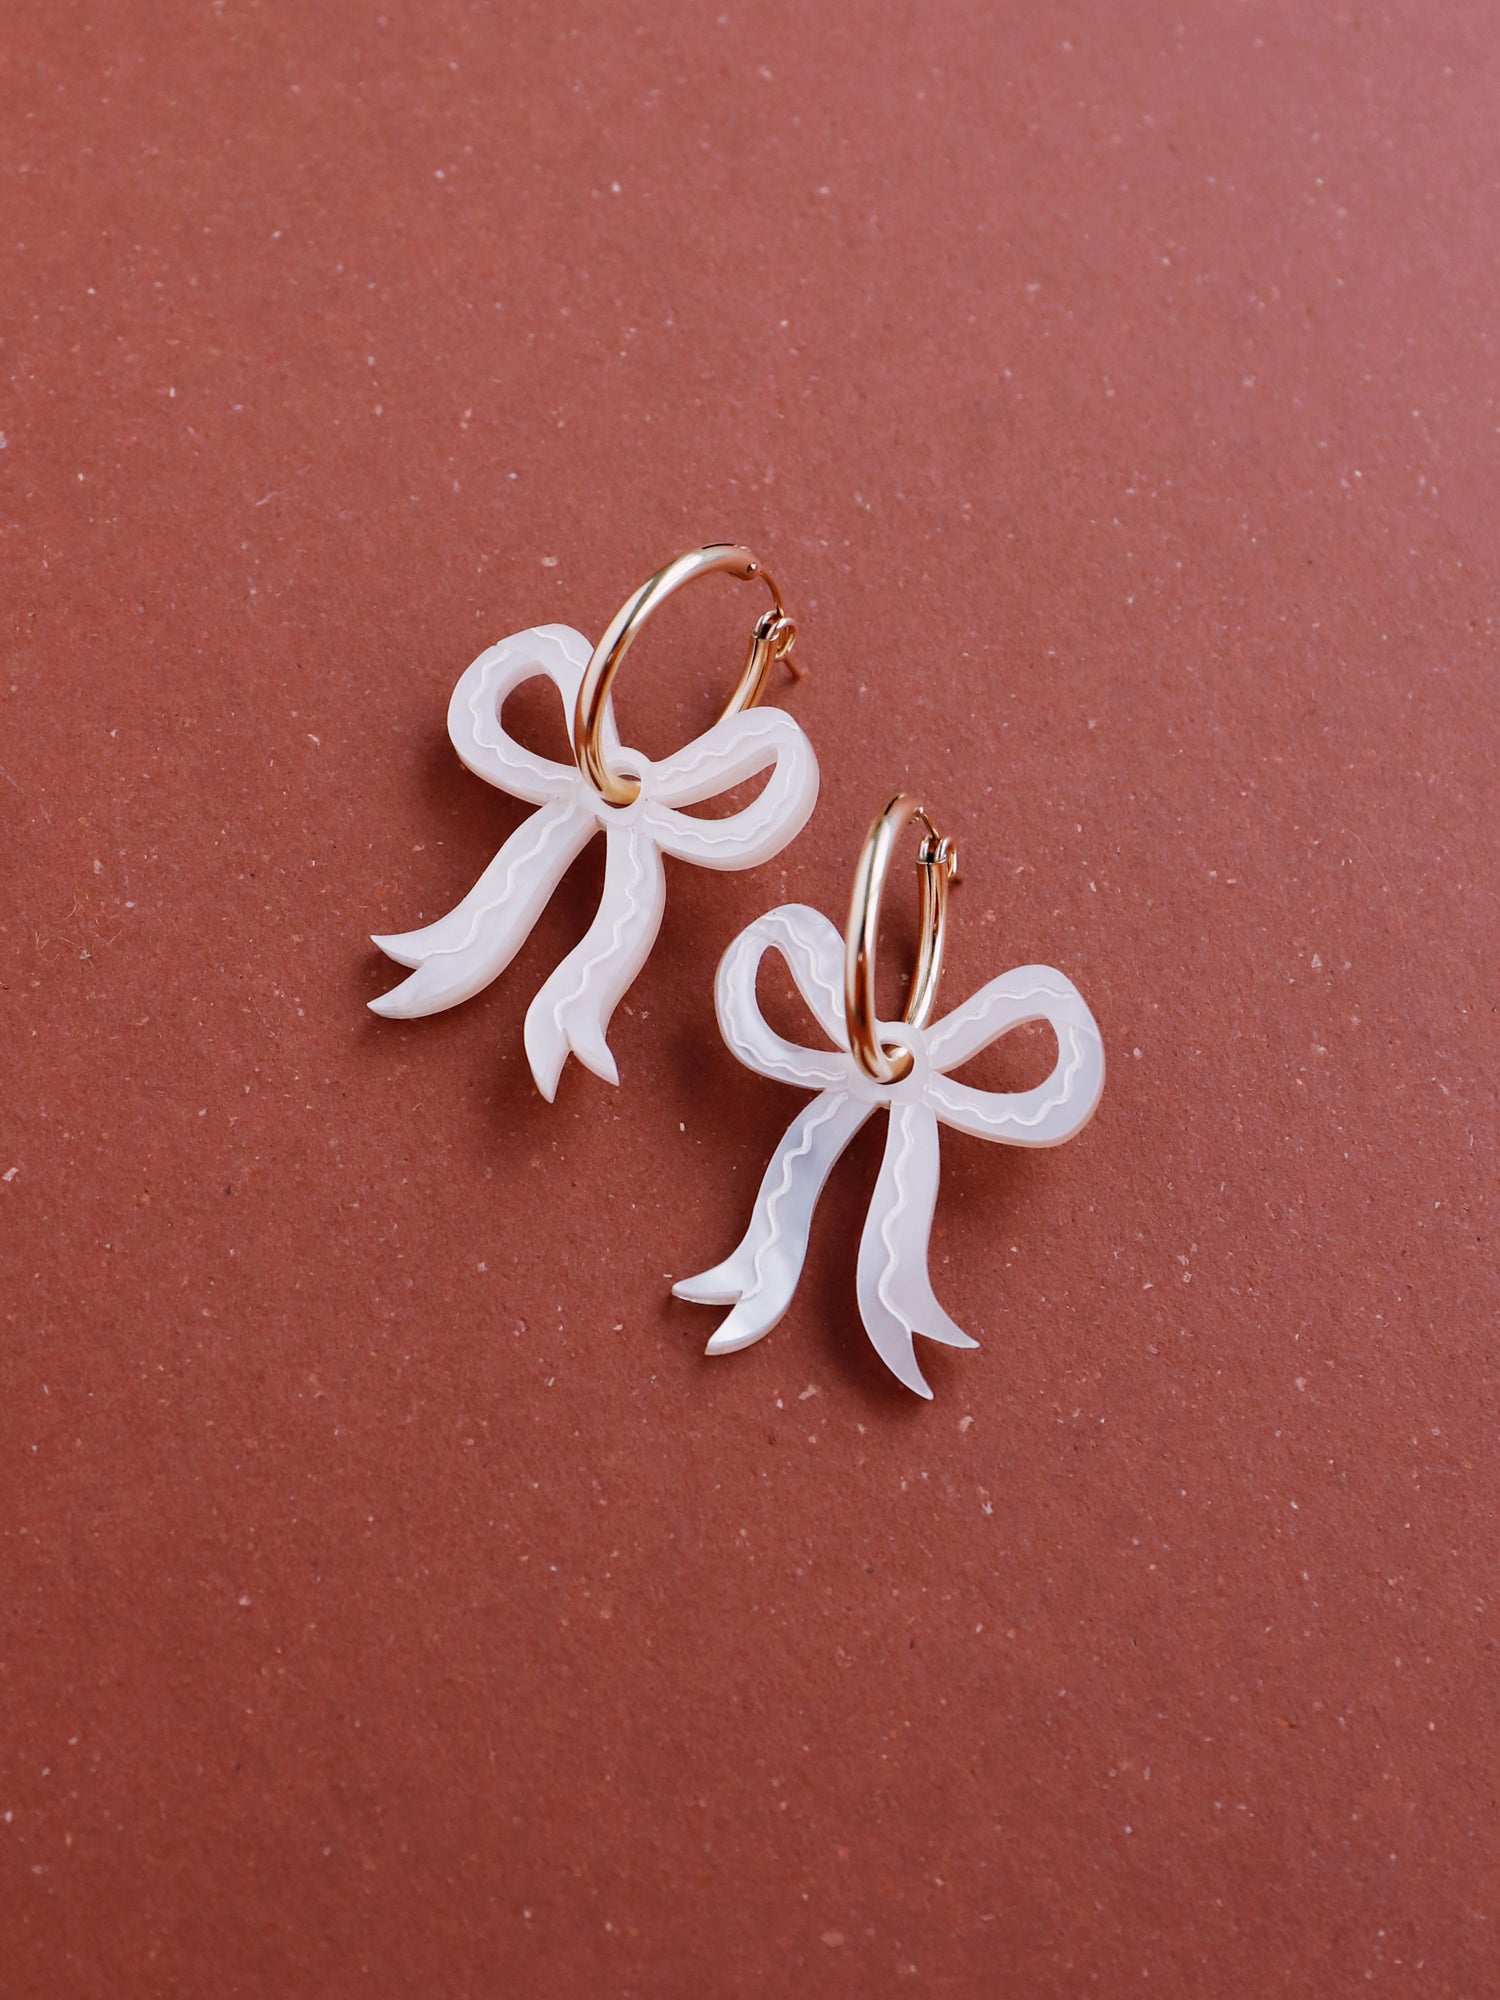 Romantic mini bow earrings in off-white made from velvety marbled acrylic with hand-inked details. Surprisingly lightweight so can be worn for extended periods of time. Each bow is hand-sculpted into a 3D form giving it a lovely realistic ribbon-like effect. This also adds a unique charm to each one. Handmade by Wolf & Moon in the UK. ⁠